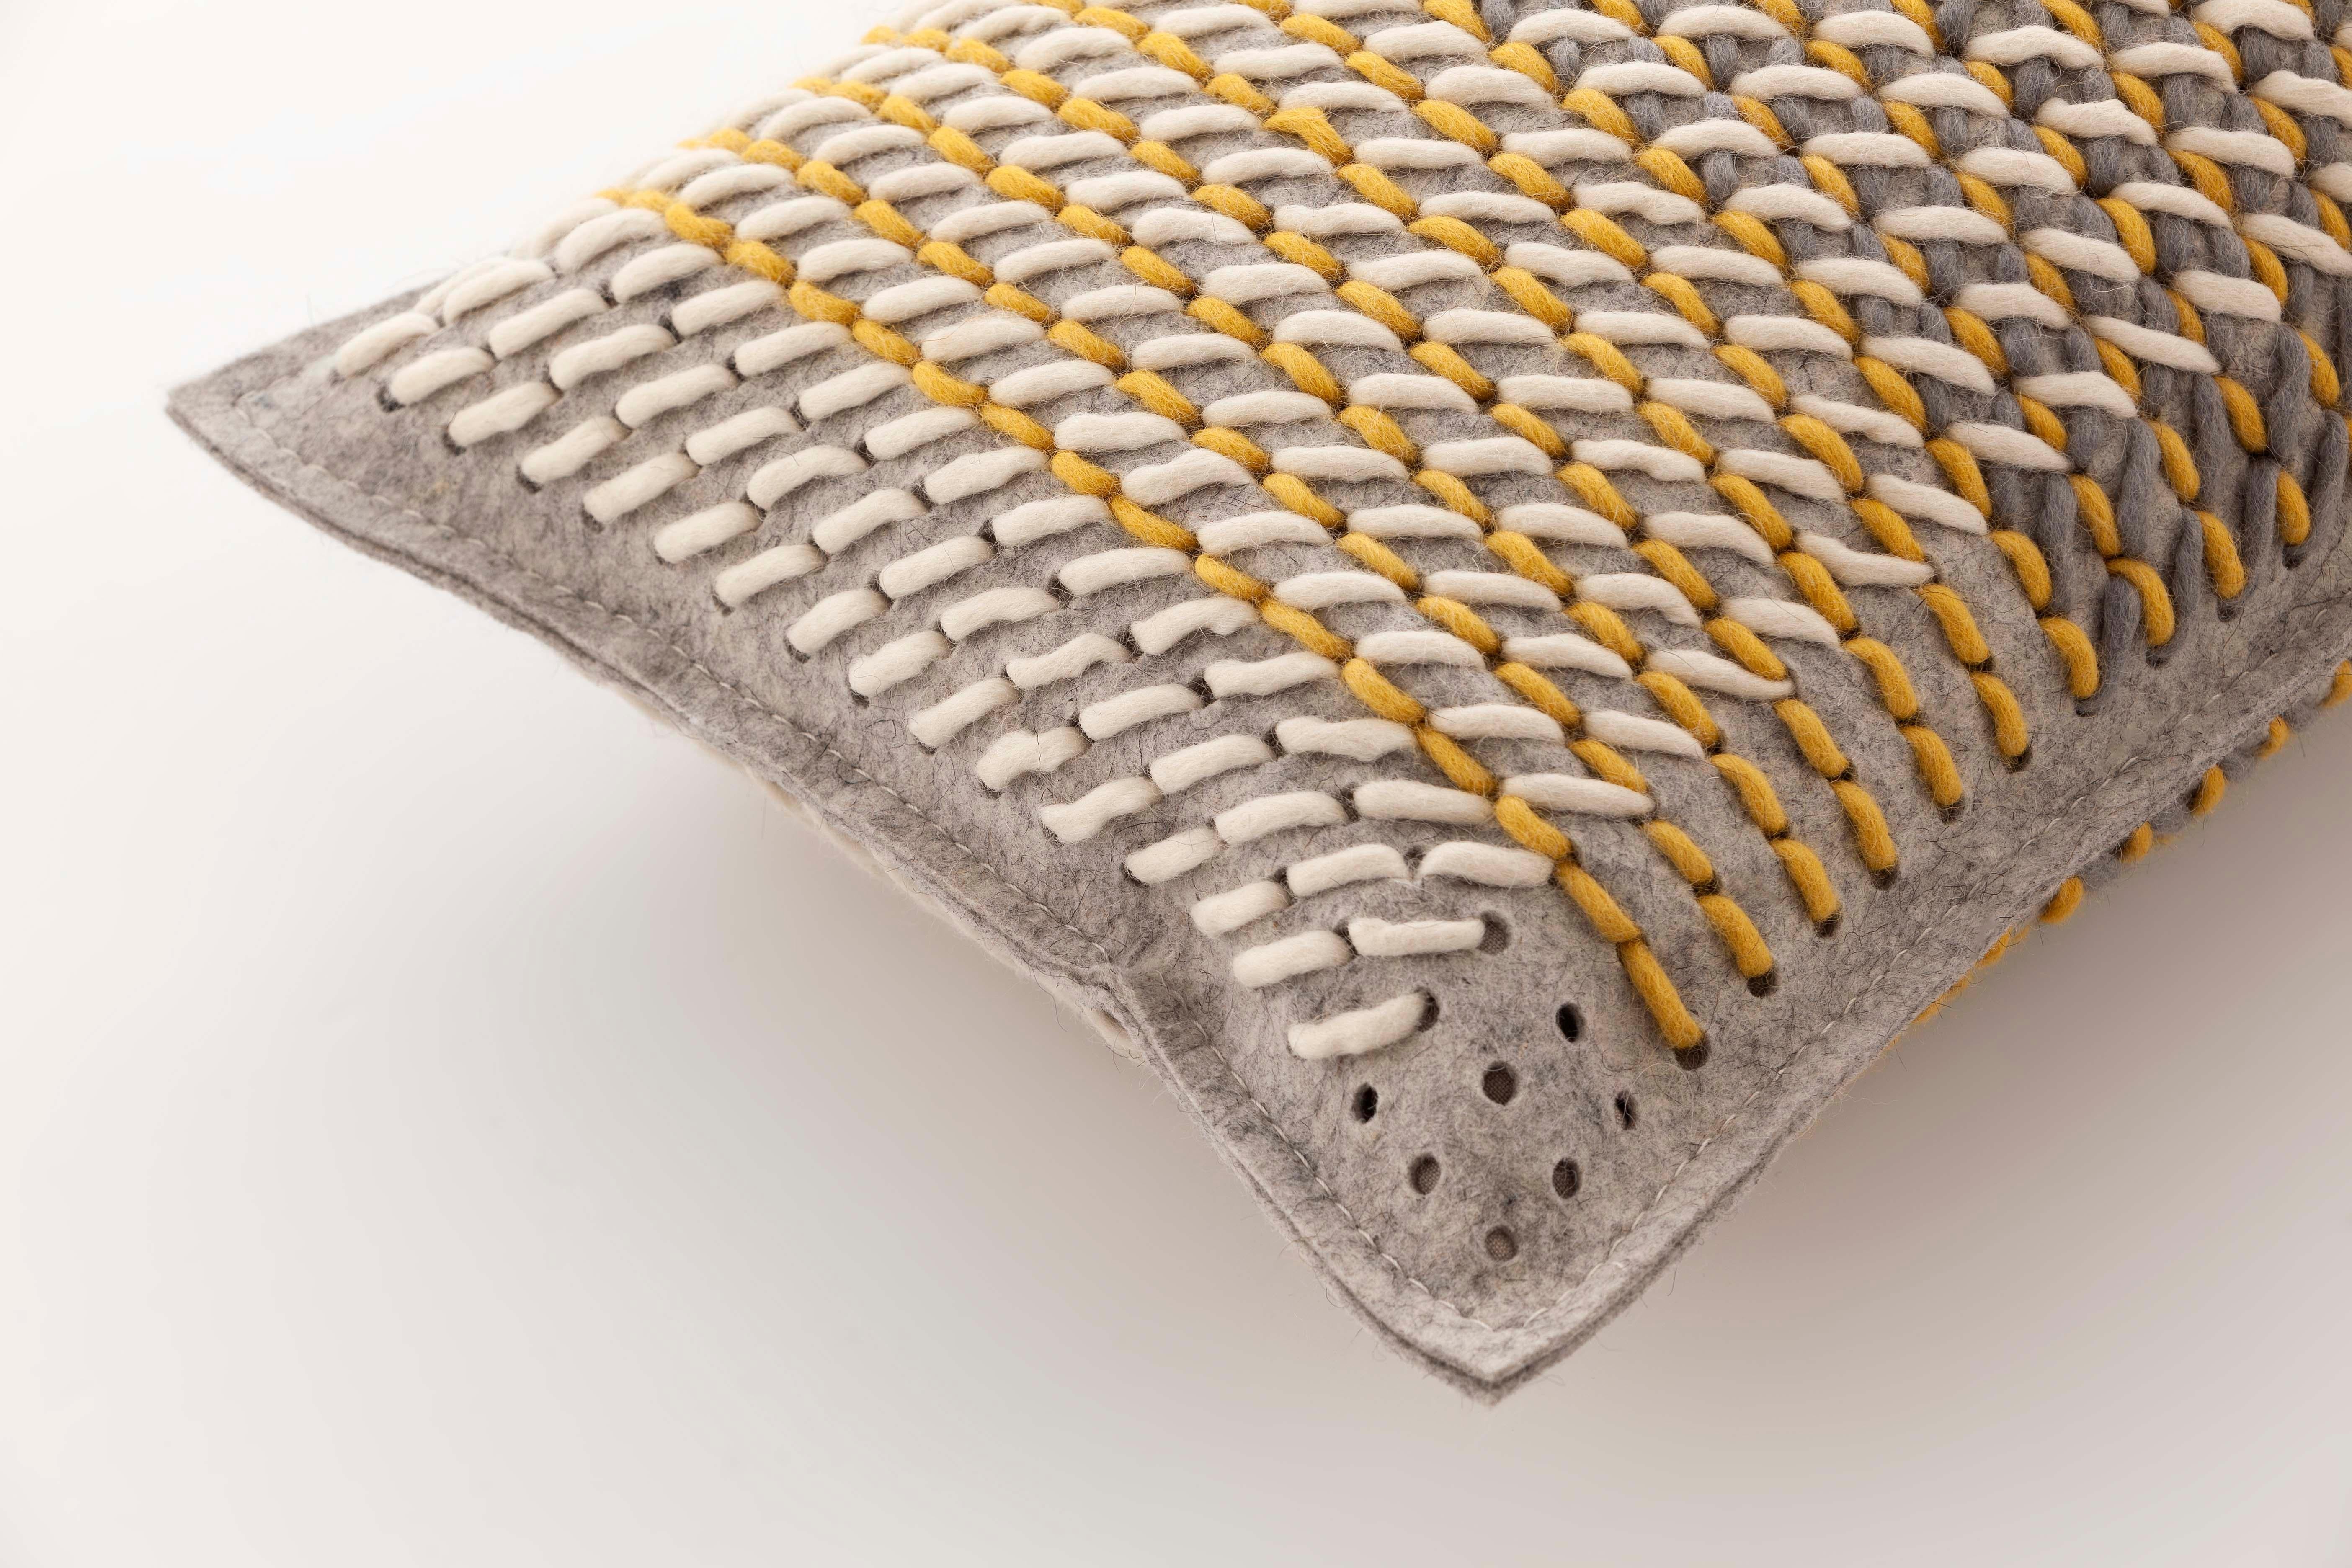 A completely different application of the possibilities offered by the technique devised by Charlotte Lancelot for the Canevas collection. Using the same cross stitch technique produced with coloured wool threads on a perforated felt base, Canevas